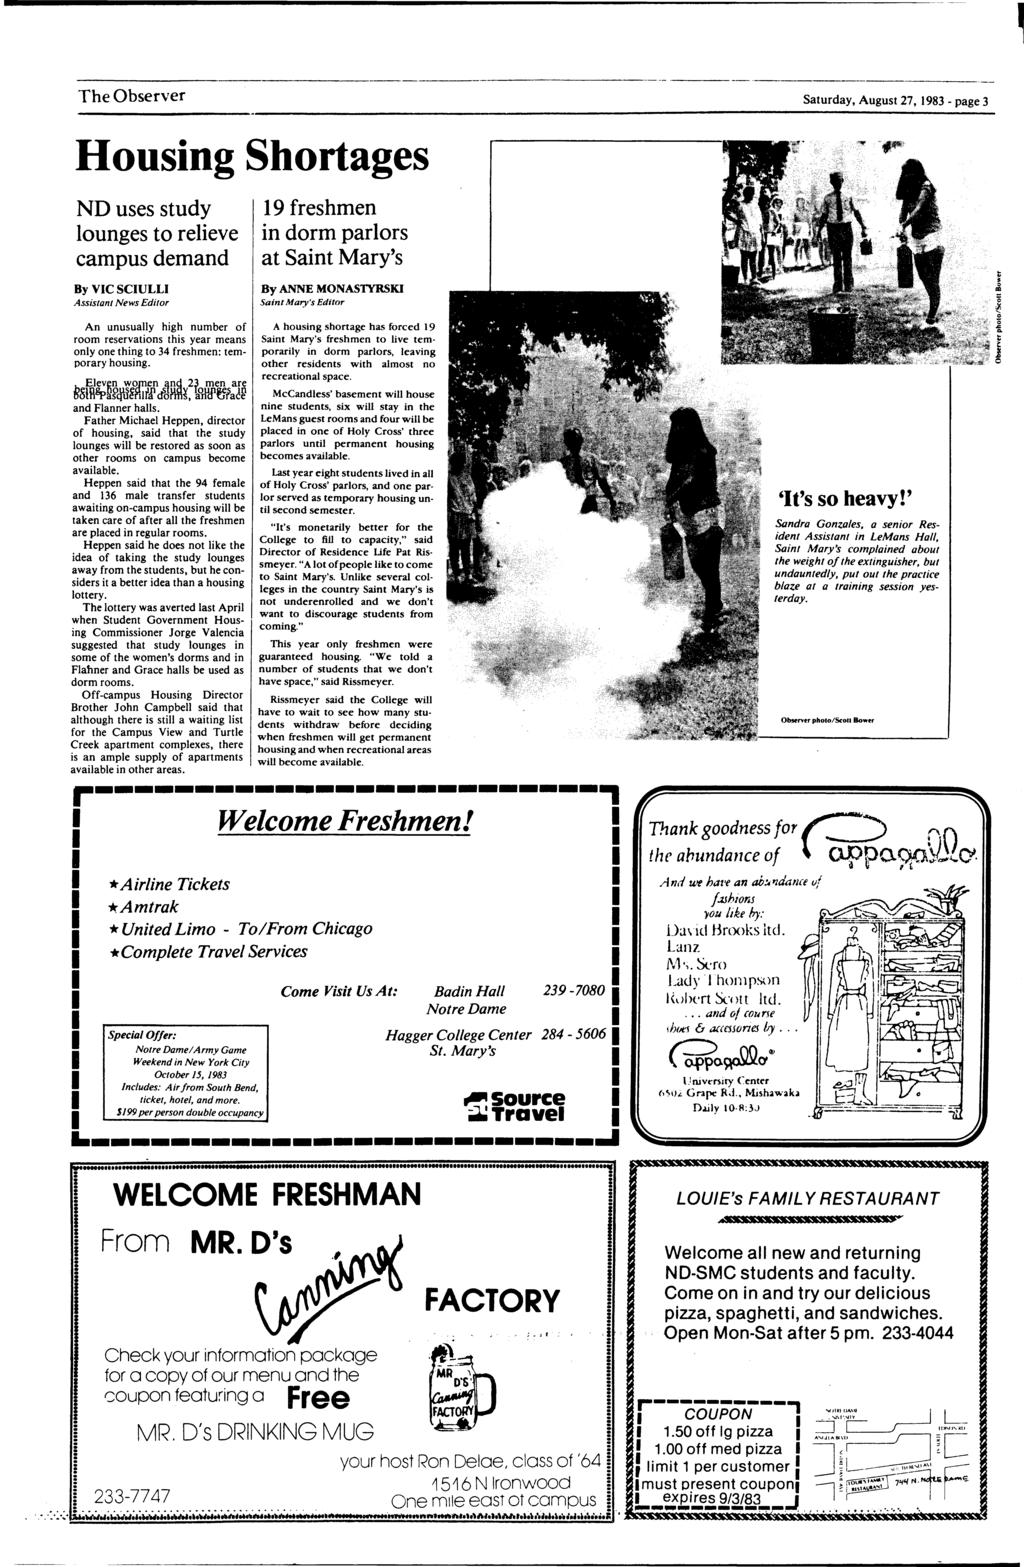 The Observer Saurday, Augus 27, 1983- page 3 Housing Shorages ND uses sudy lounges o relieve campus demand By VC SCULL Assisan News Edior 19 freshmen in dorm parlors a Sain Mary's By ANNE MONAS1YRSK